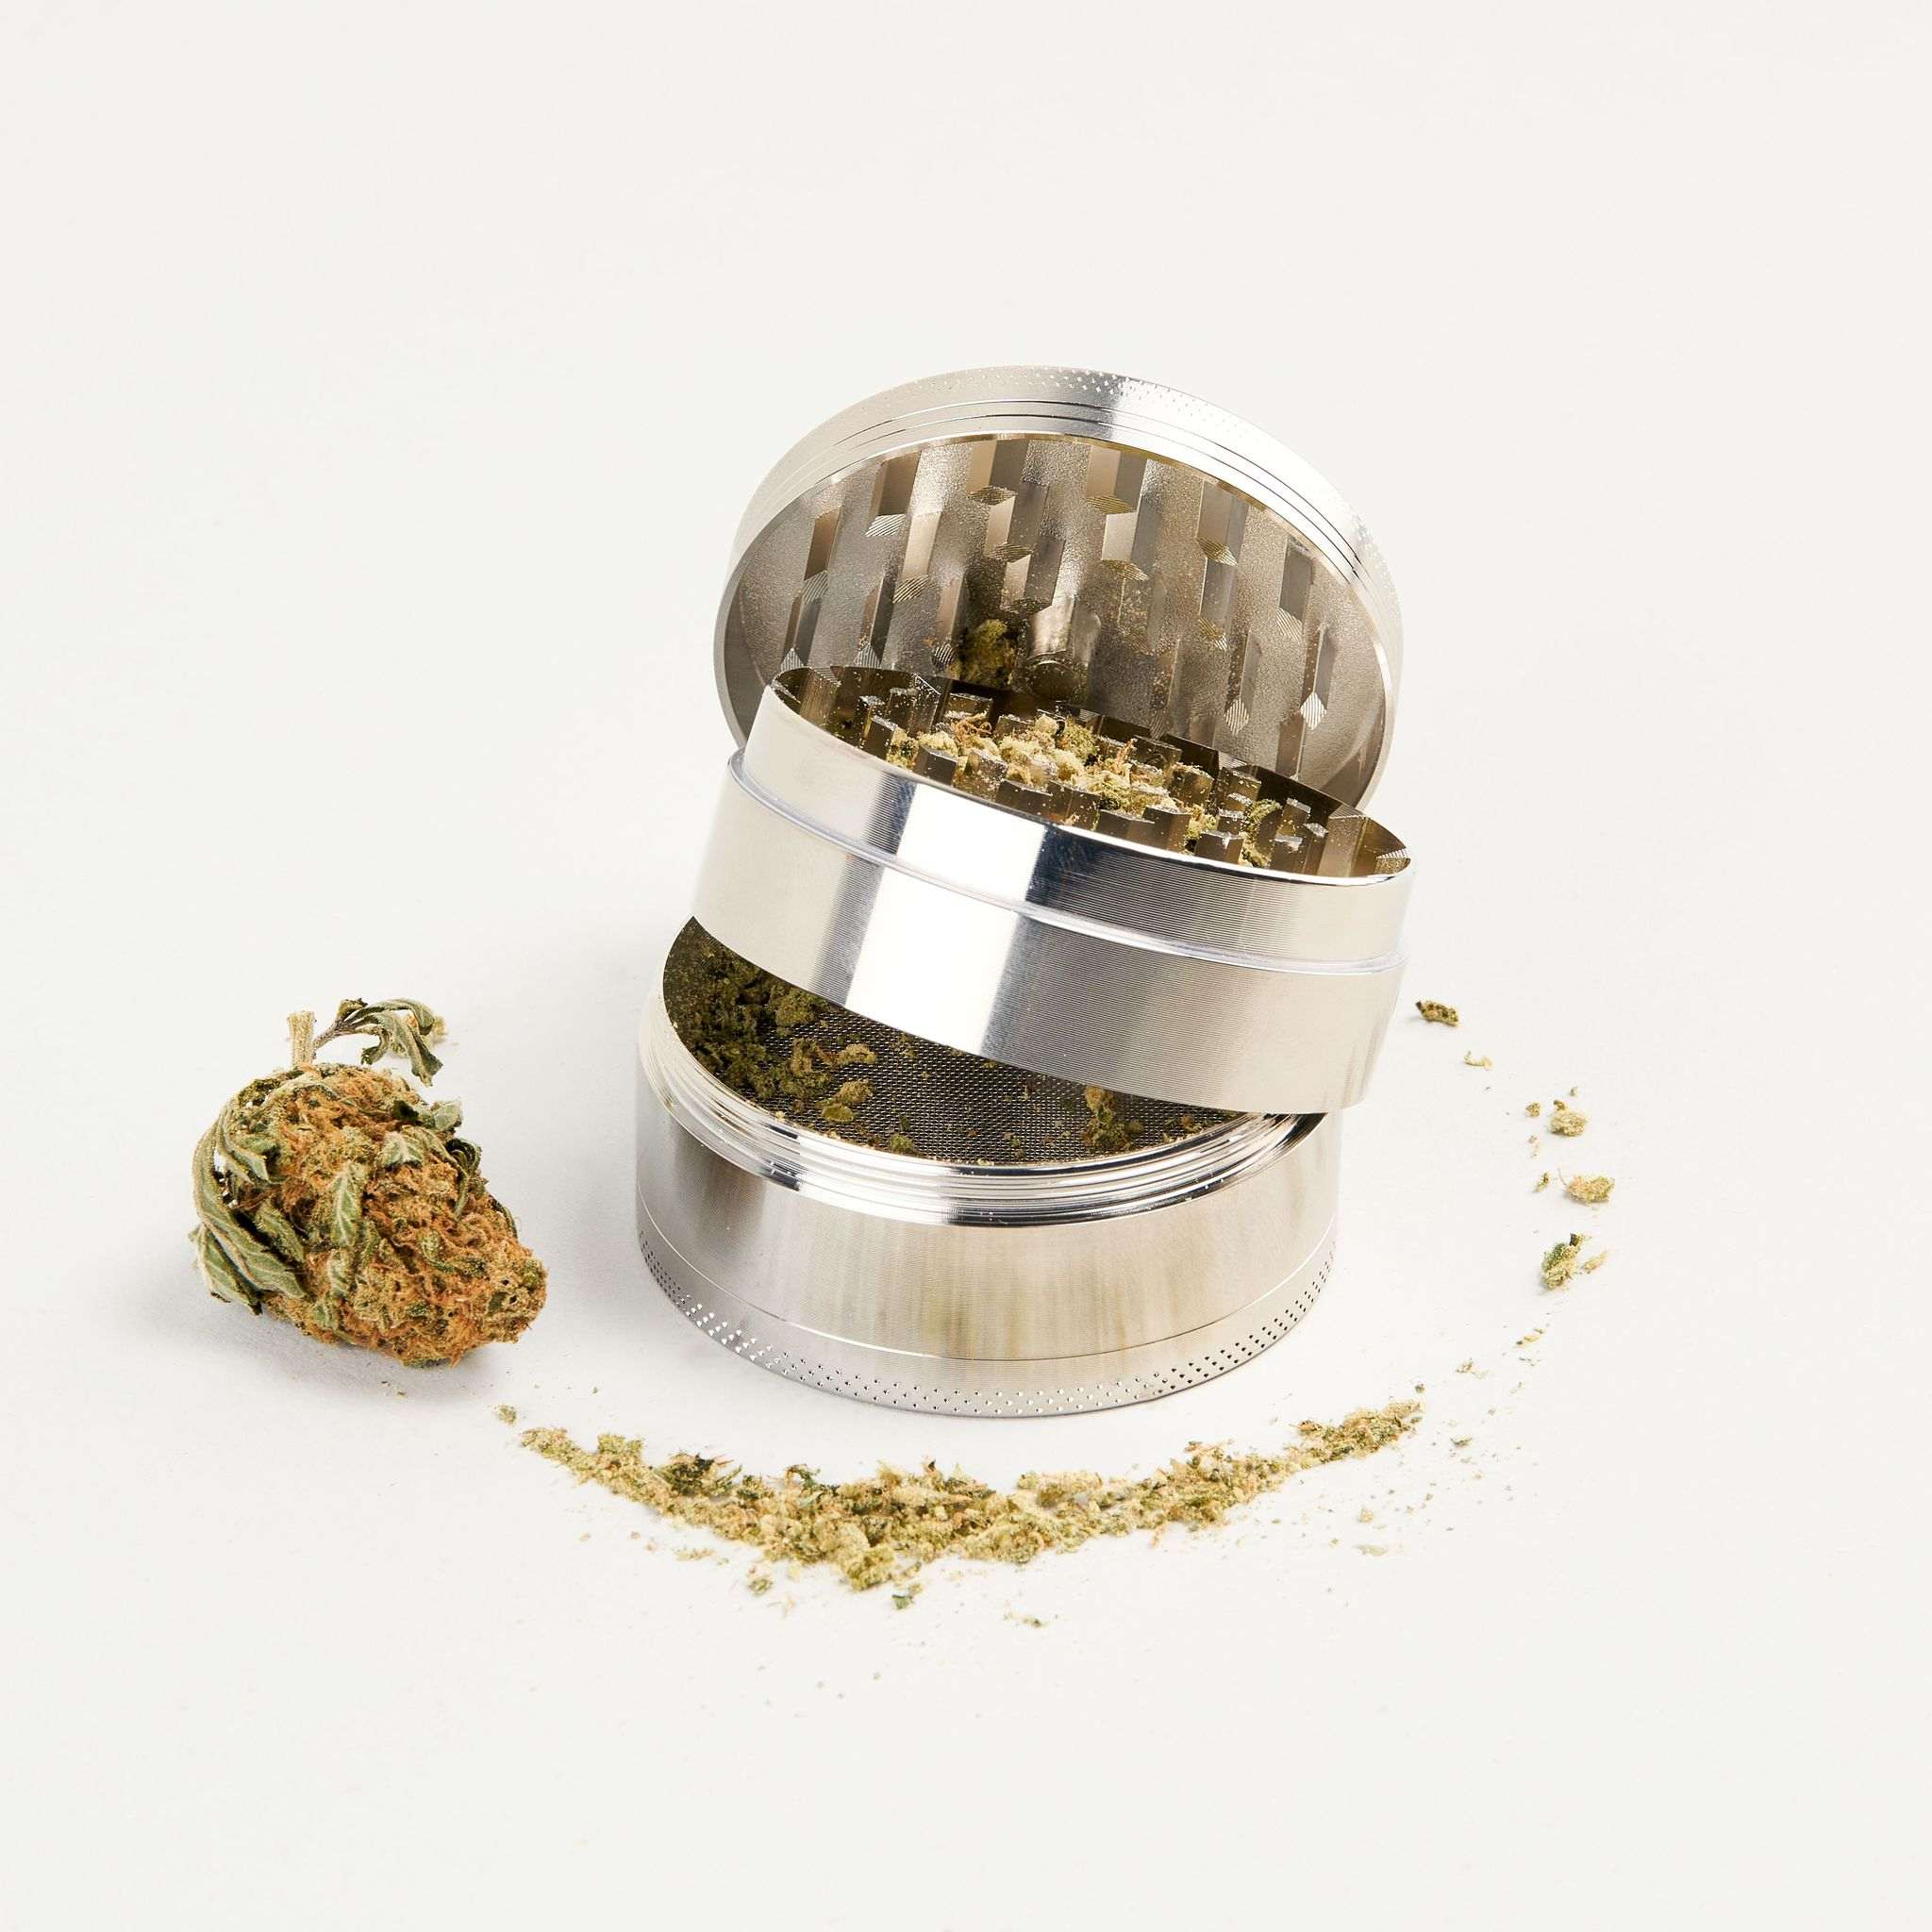 4-piece grinder with screen